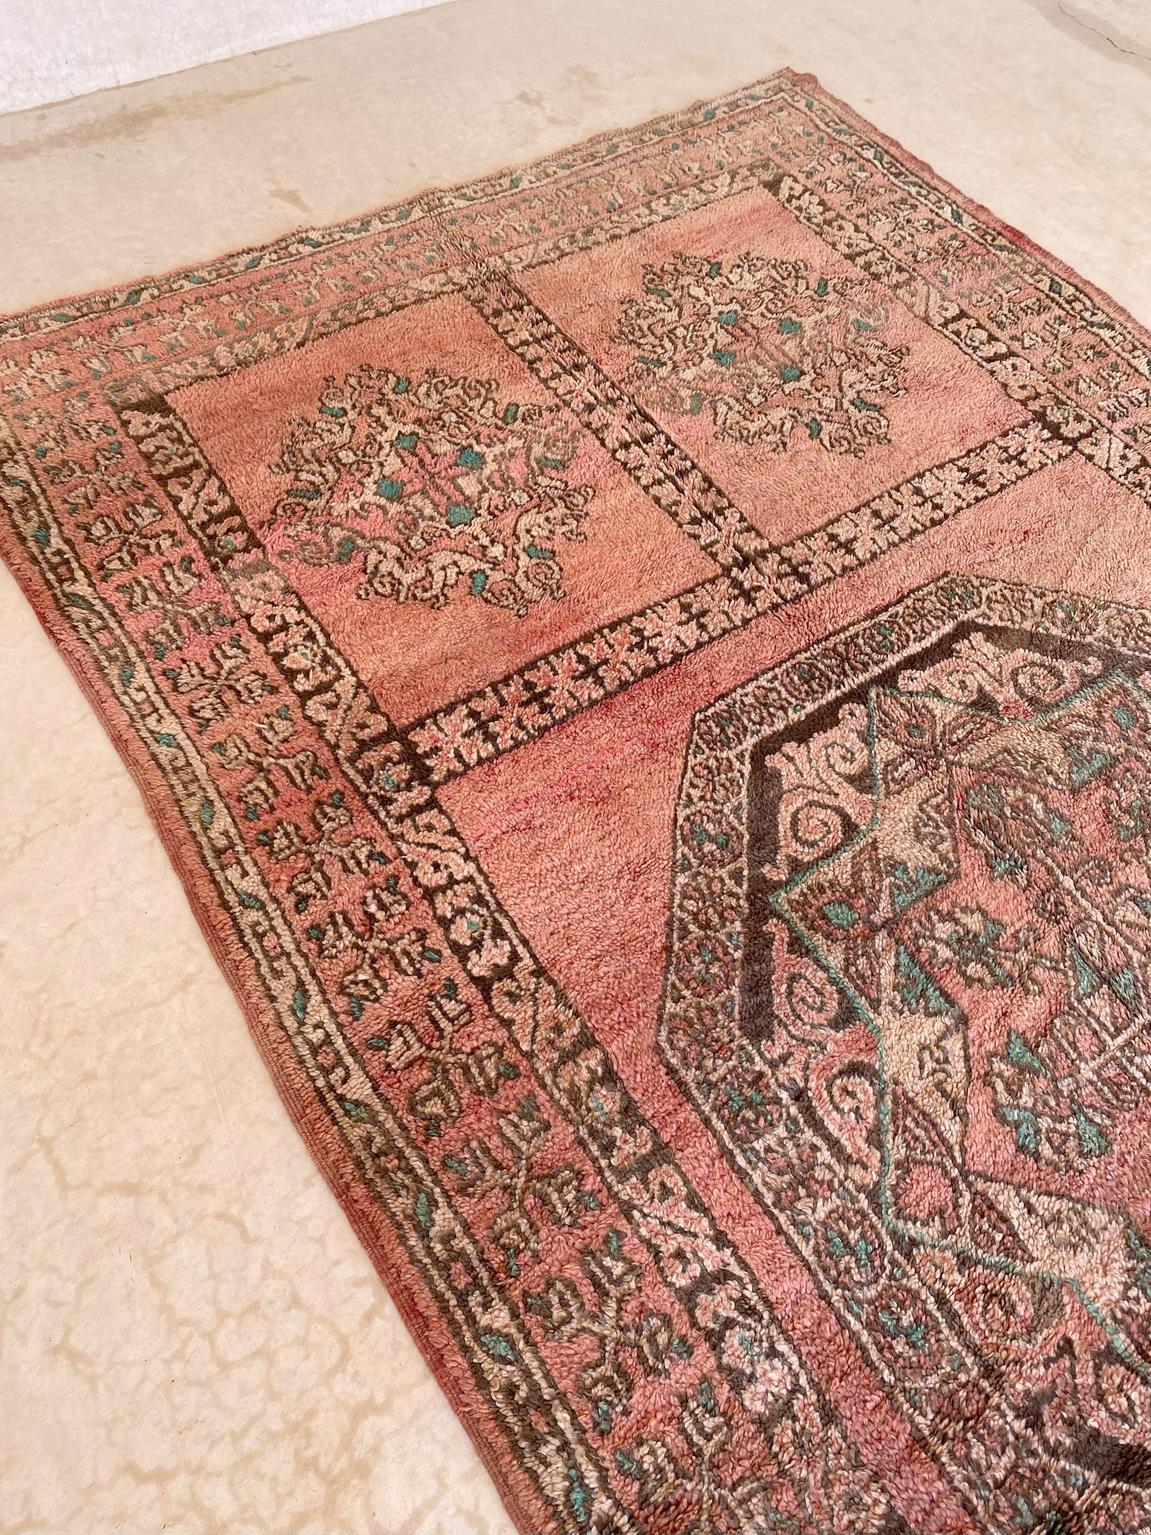 Vintage Moroccan Ait Yacoub rug - Peach fuzz - 7.1x13.3feet / 217x407cm In Good Condition For Sale In Marrakech, MA